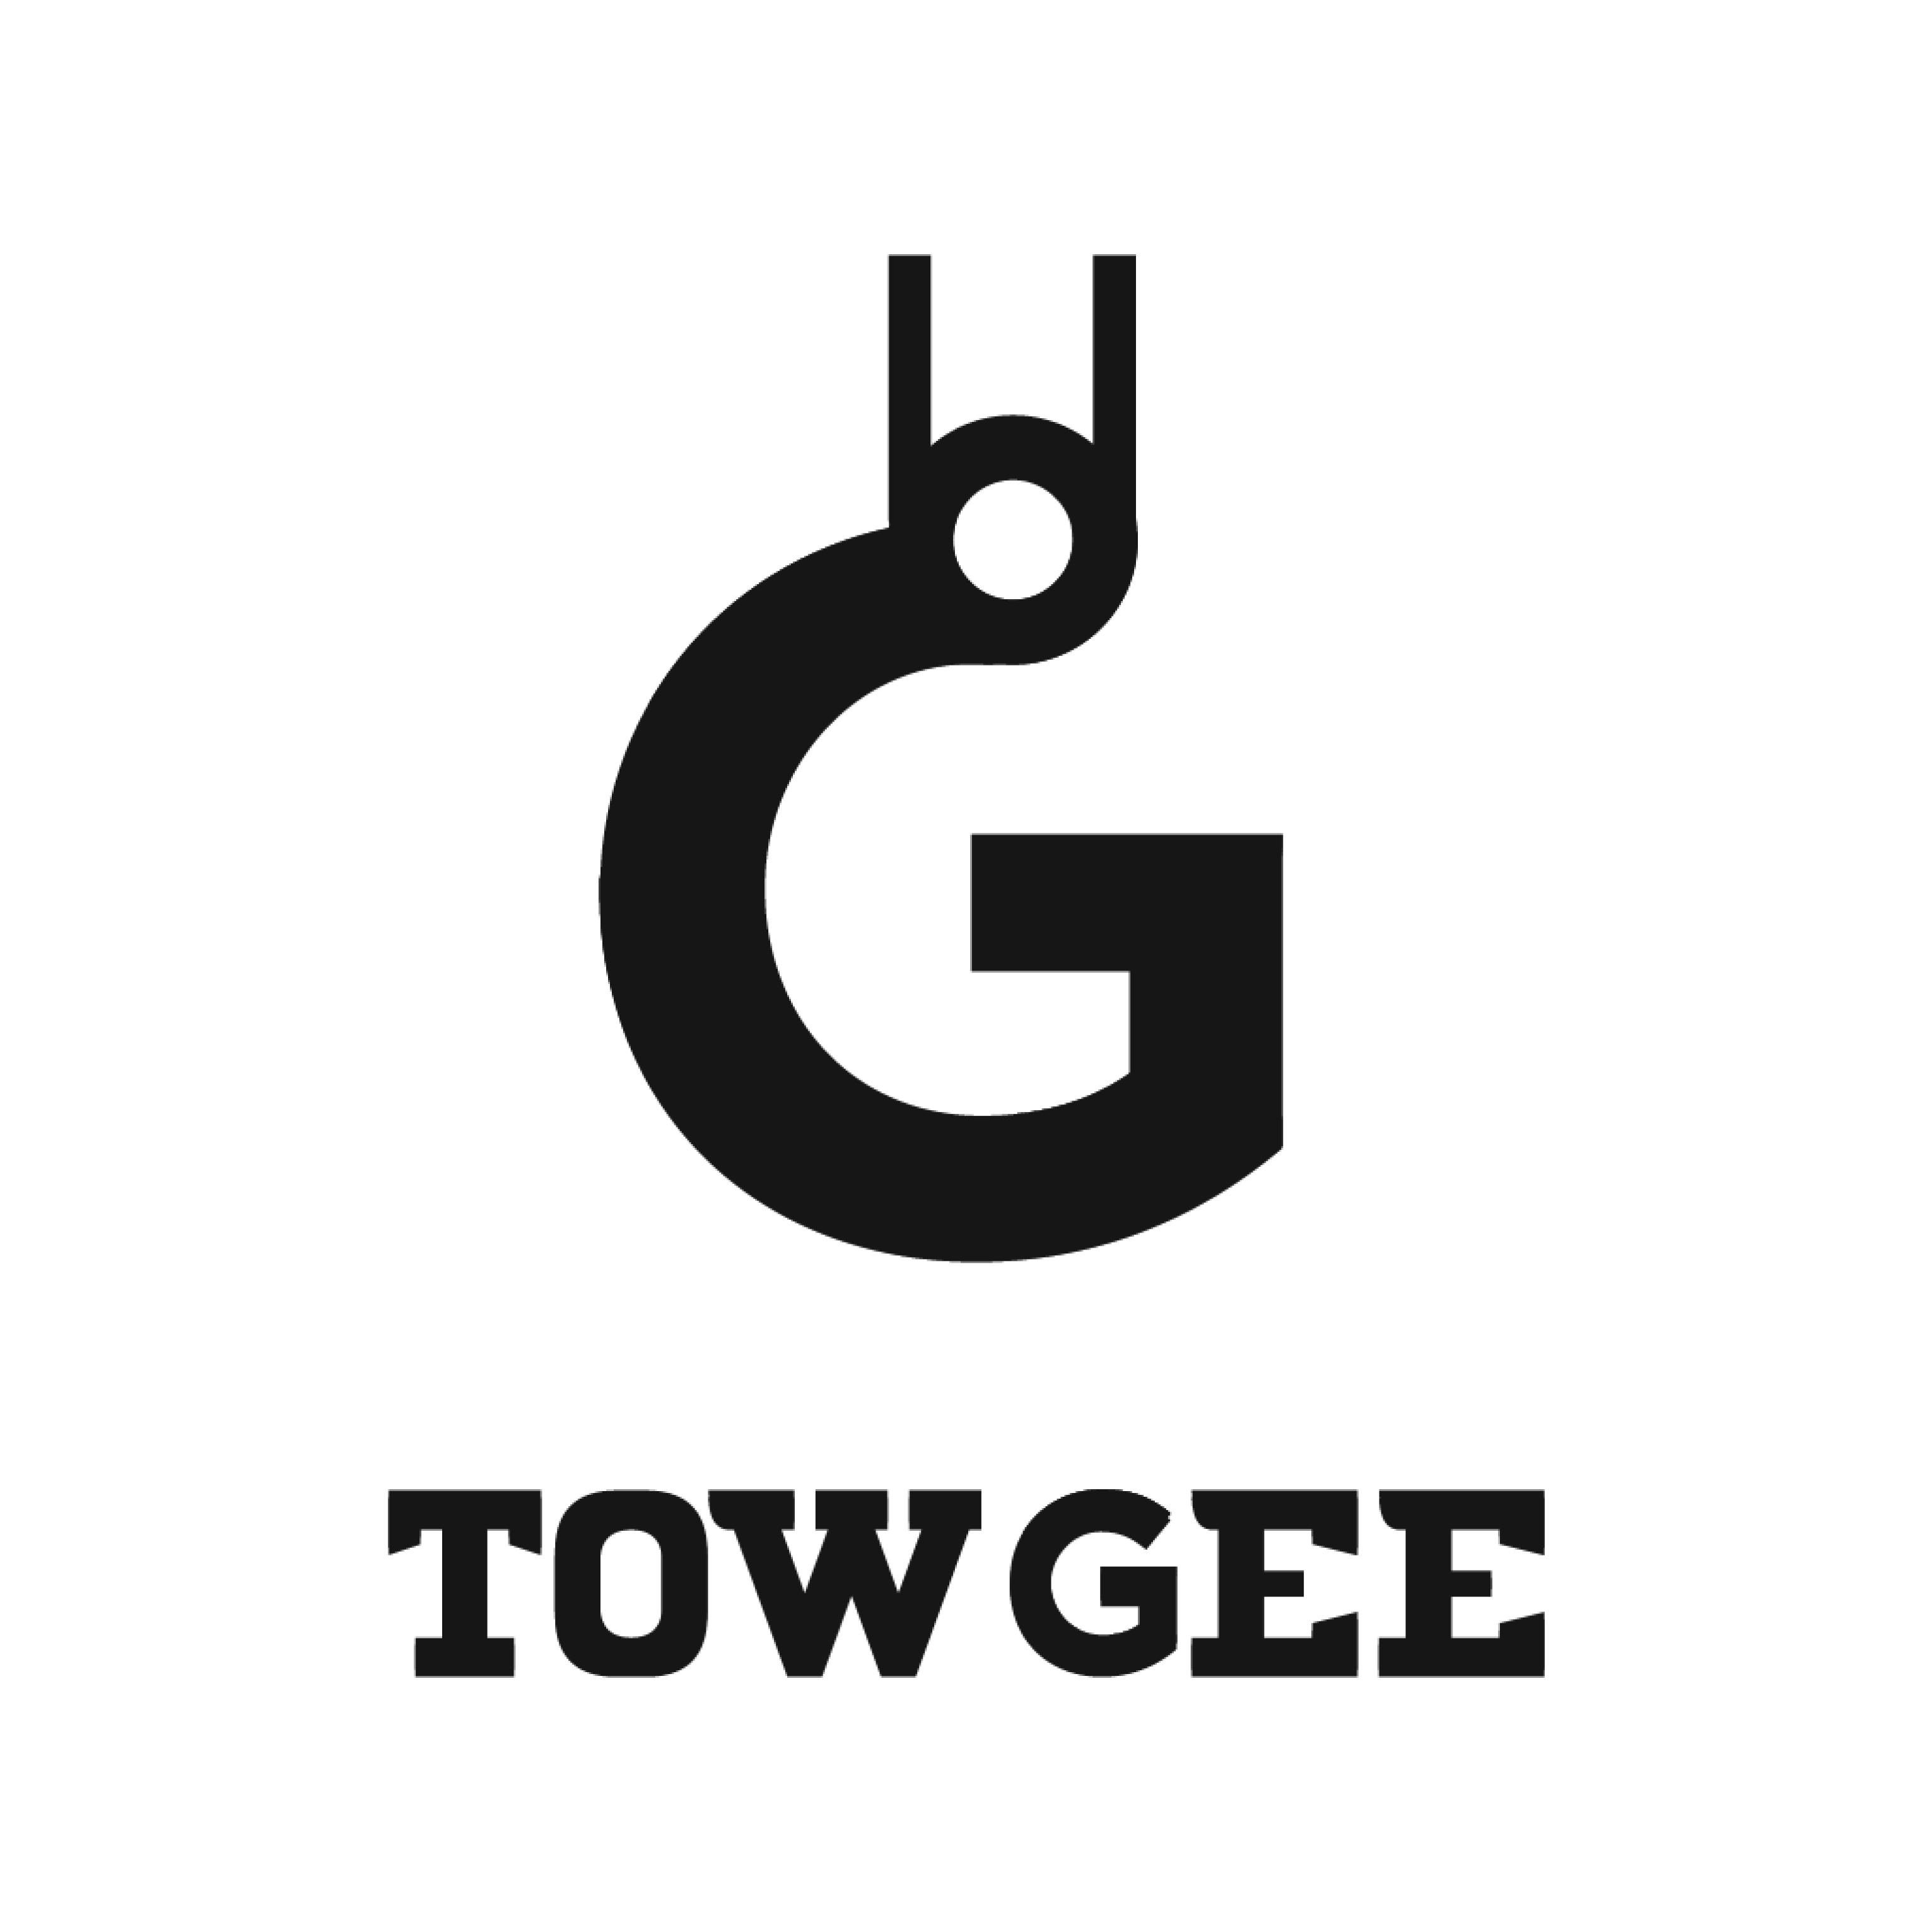 Towgee